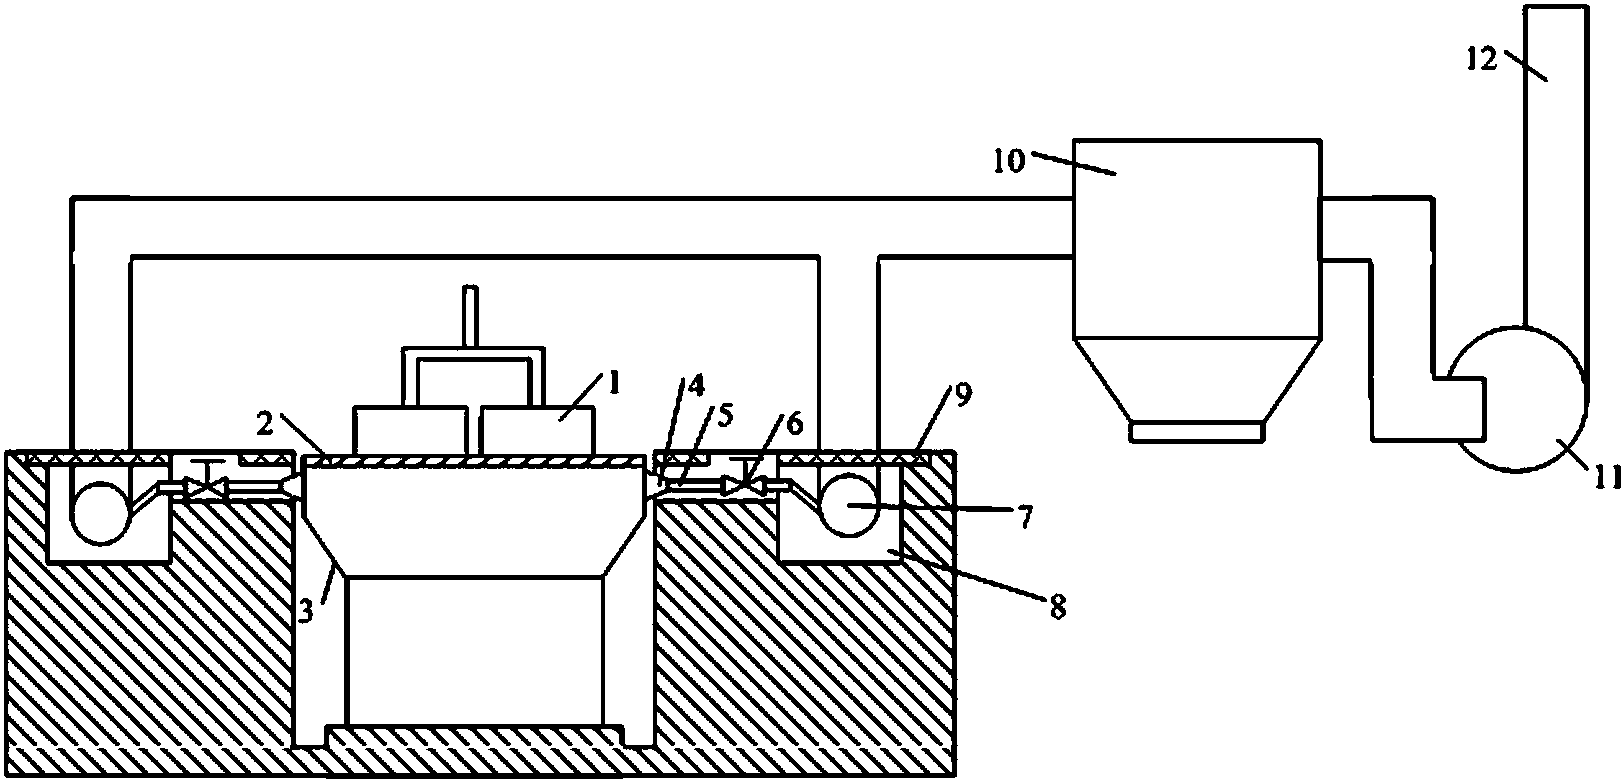 Dust recovery system of electrolyte manual cleaning workshop section